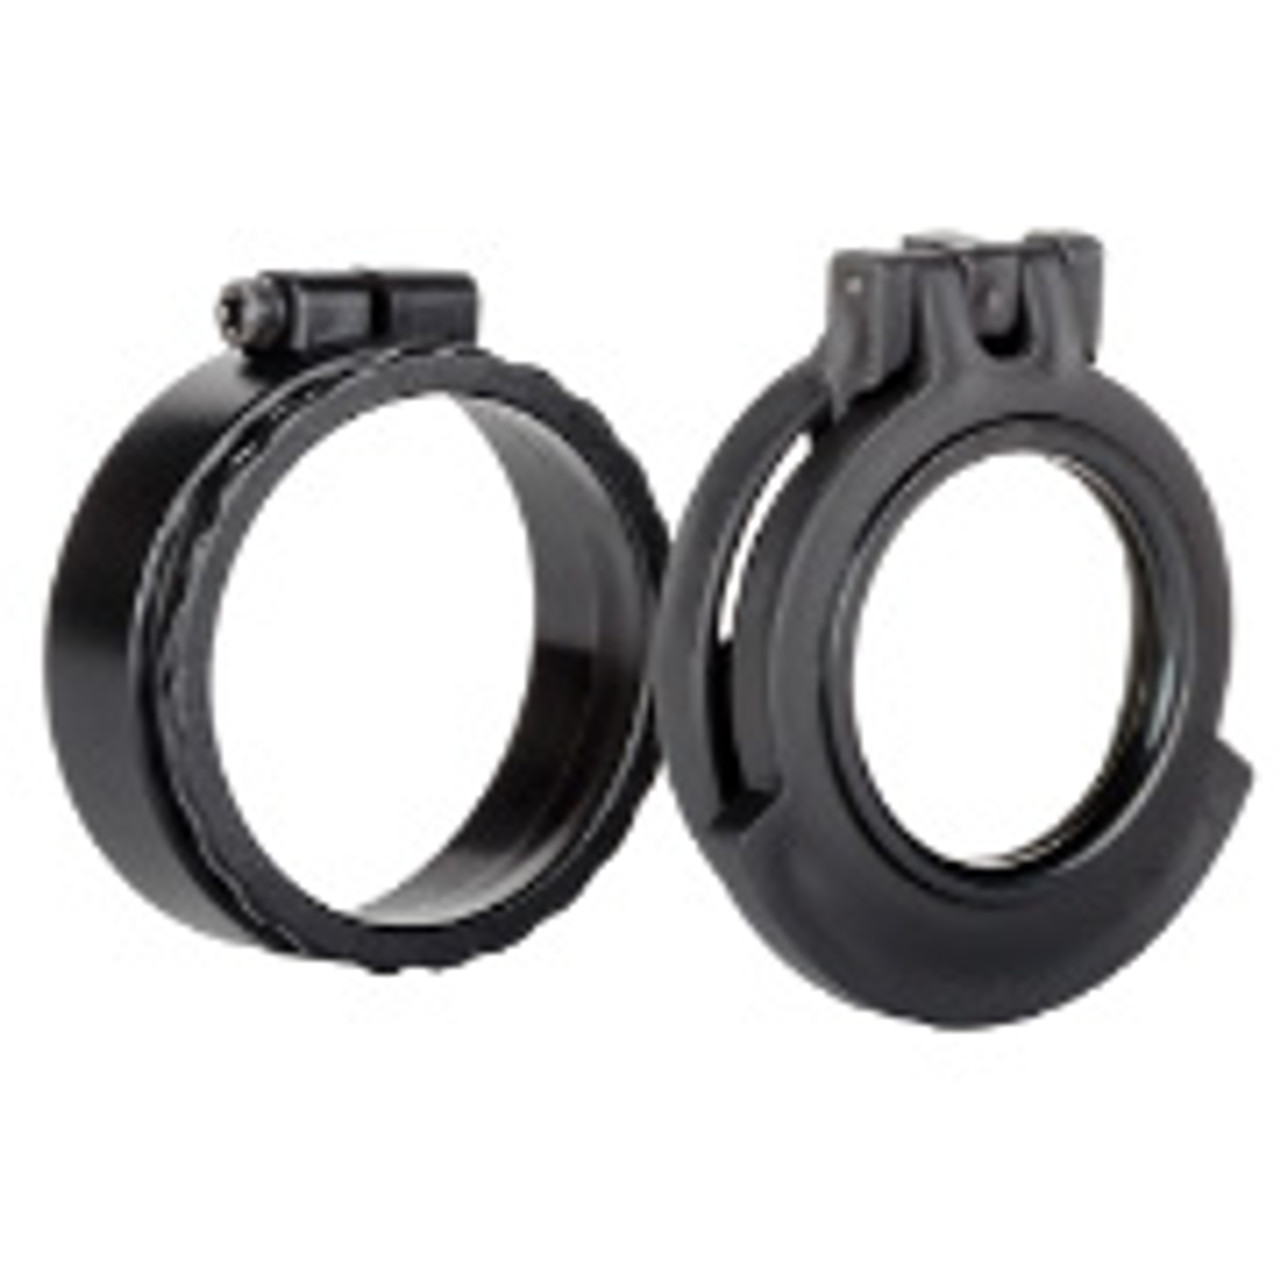 Clear See-Through Scope Cover with Adapter Ring for Zeiss Victory V8 1.1-8x30, Black, Ocular